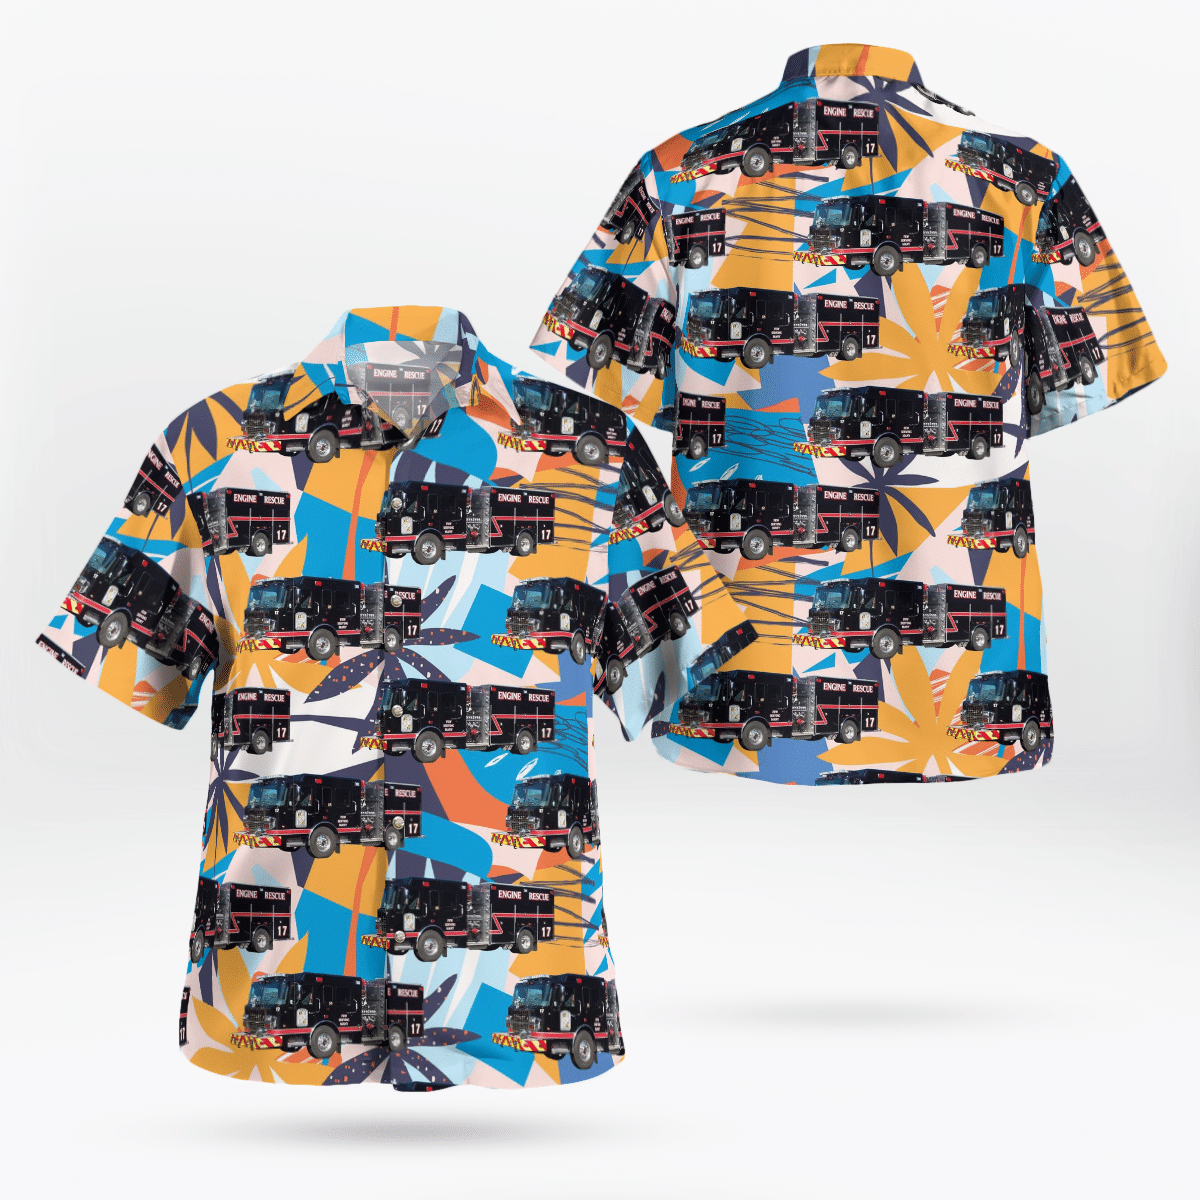 Shop now to find the perfect Hawaii Shirt for your hobby 29